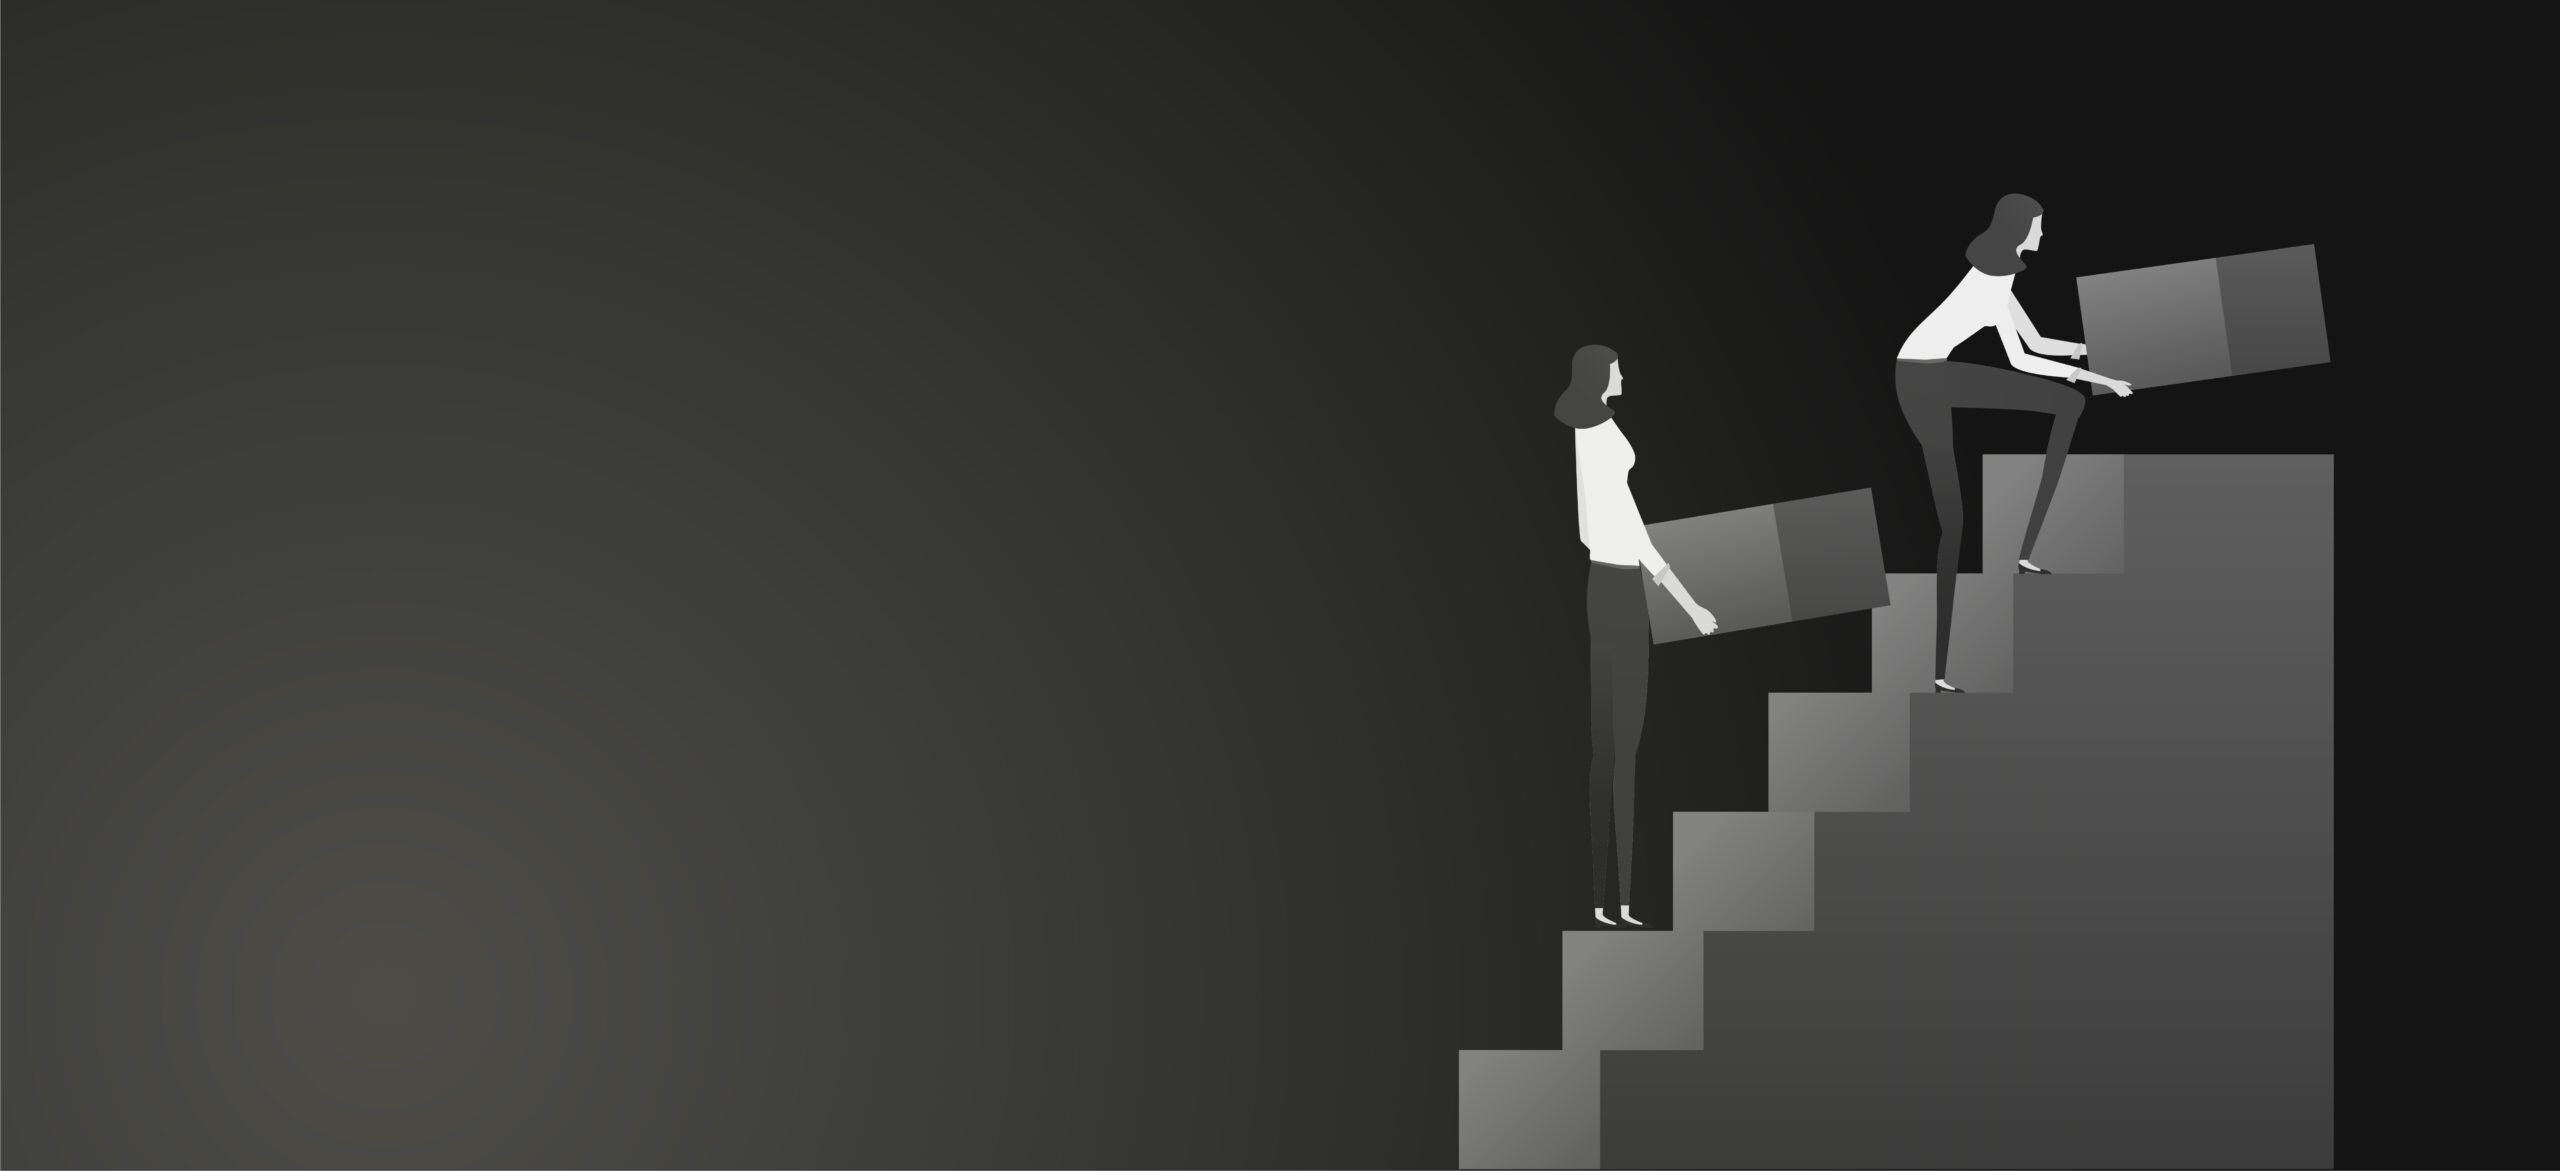 Black and white illustration of 2 women walking up stairs holding boxes.